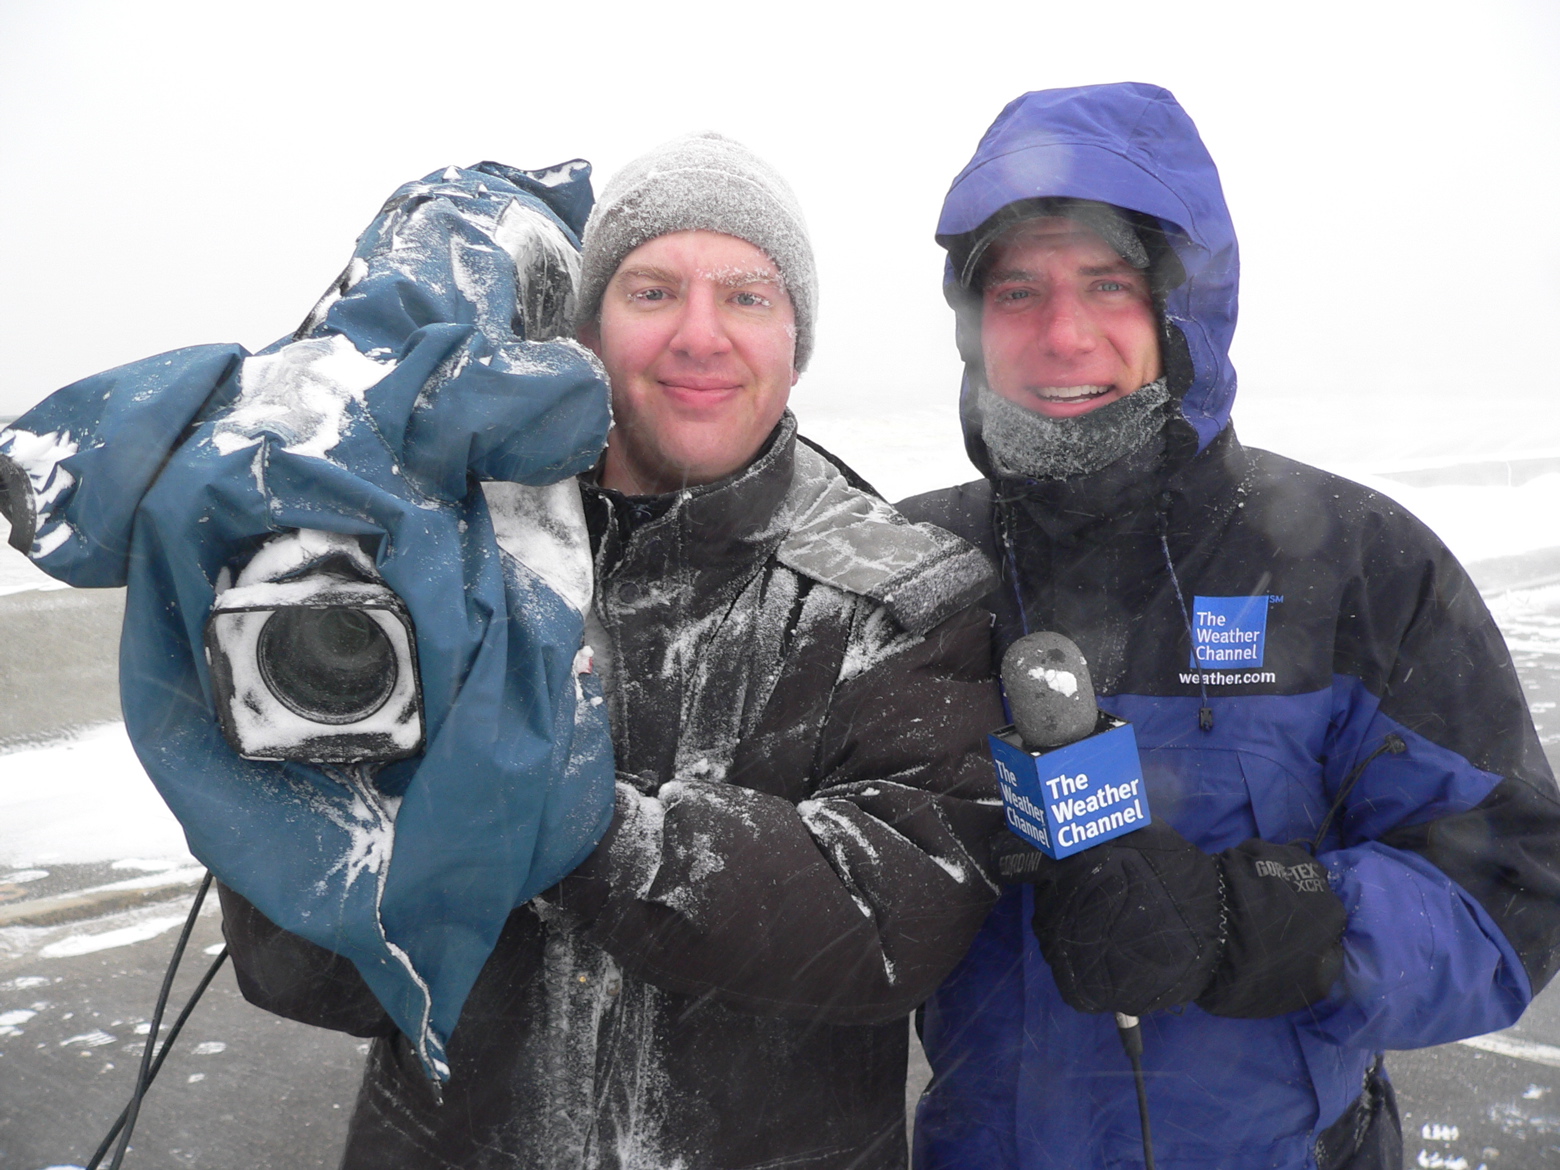  Live shots with the Weather Channel in a blizzard. 